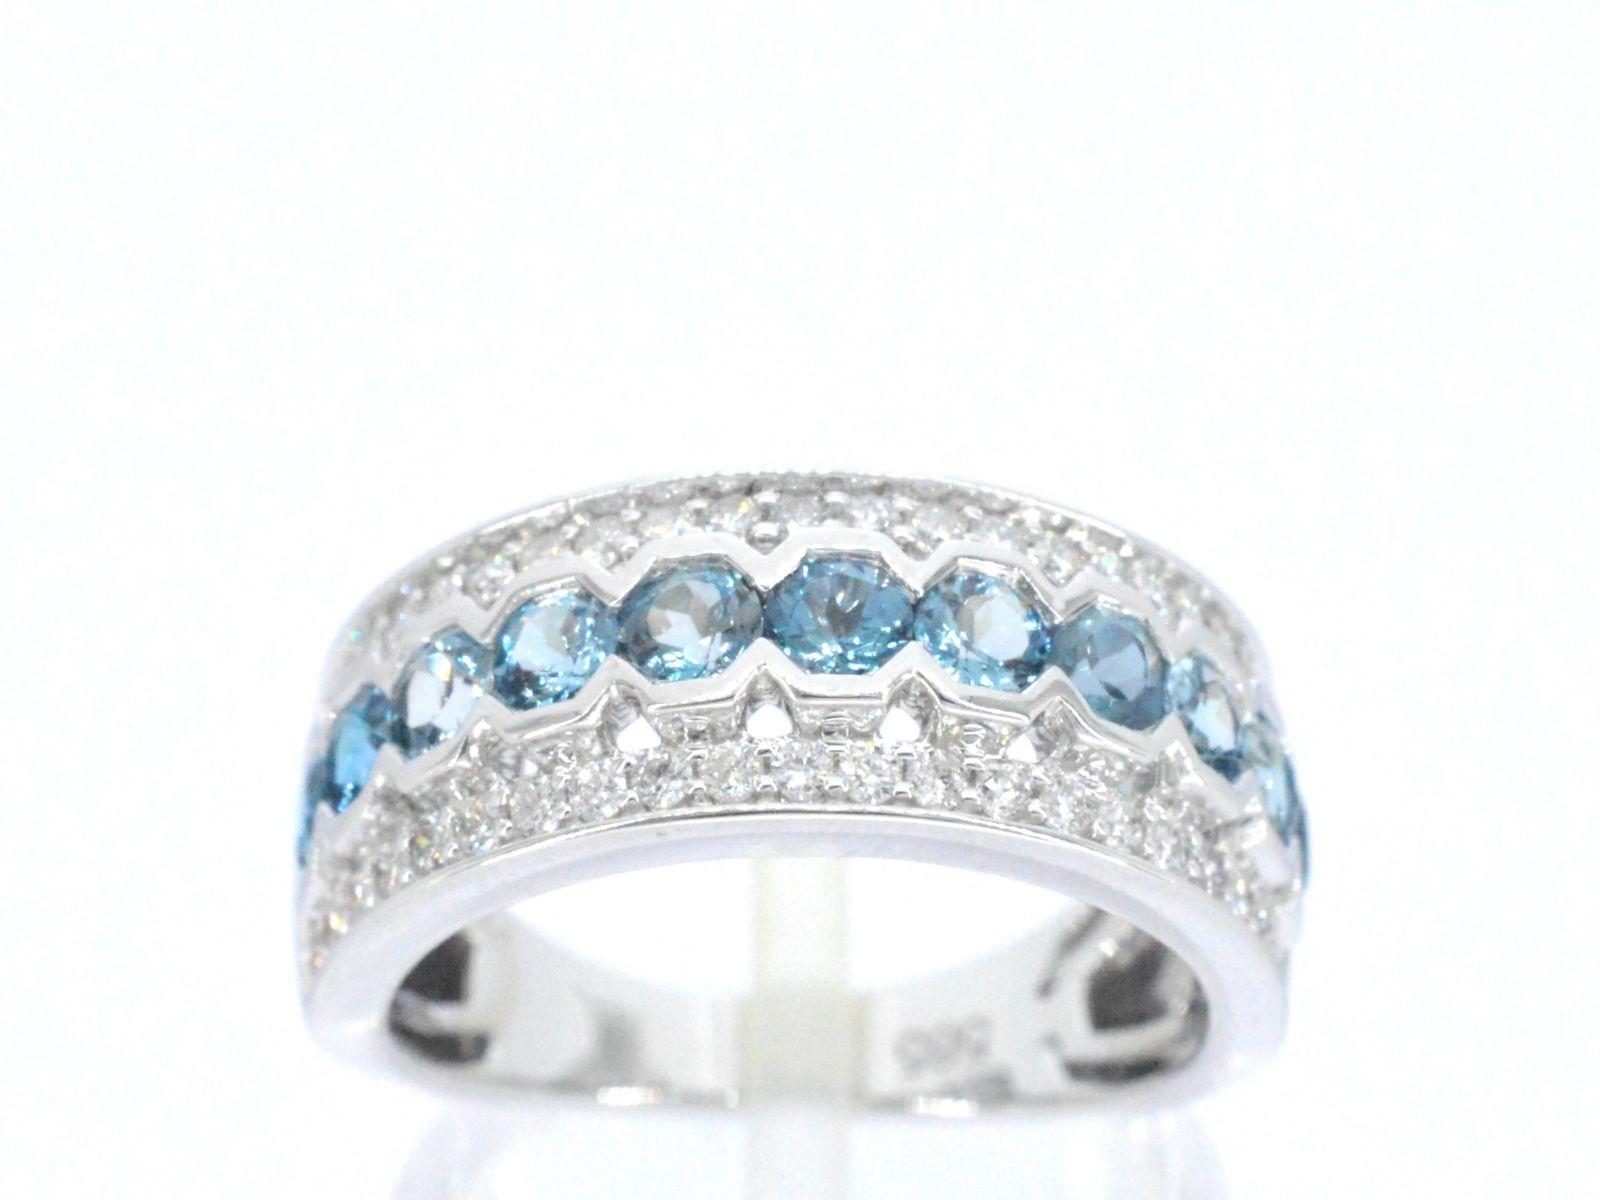 This stunning white gold pave ring features a dazzling combination of diamonds and topaz gemstones. The diamonds are carefully pave-set along the band, creating a continuous and sparkling display, while the topaz gemstones add a touch of color and